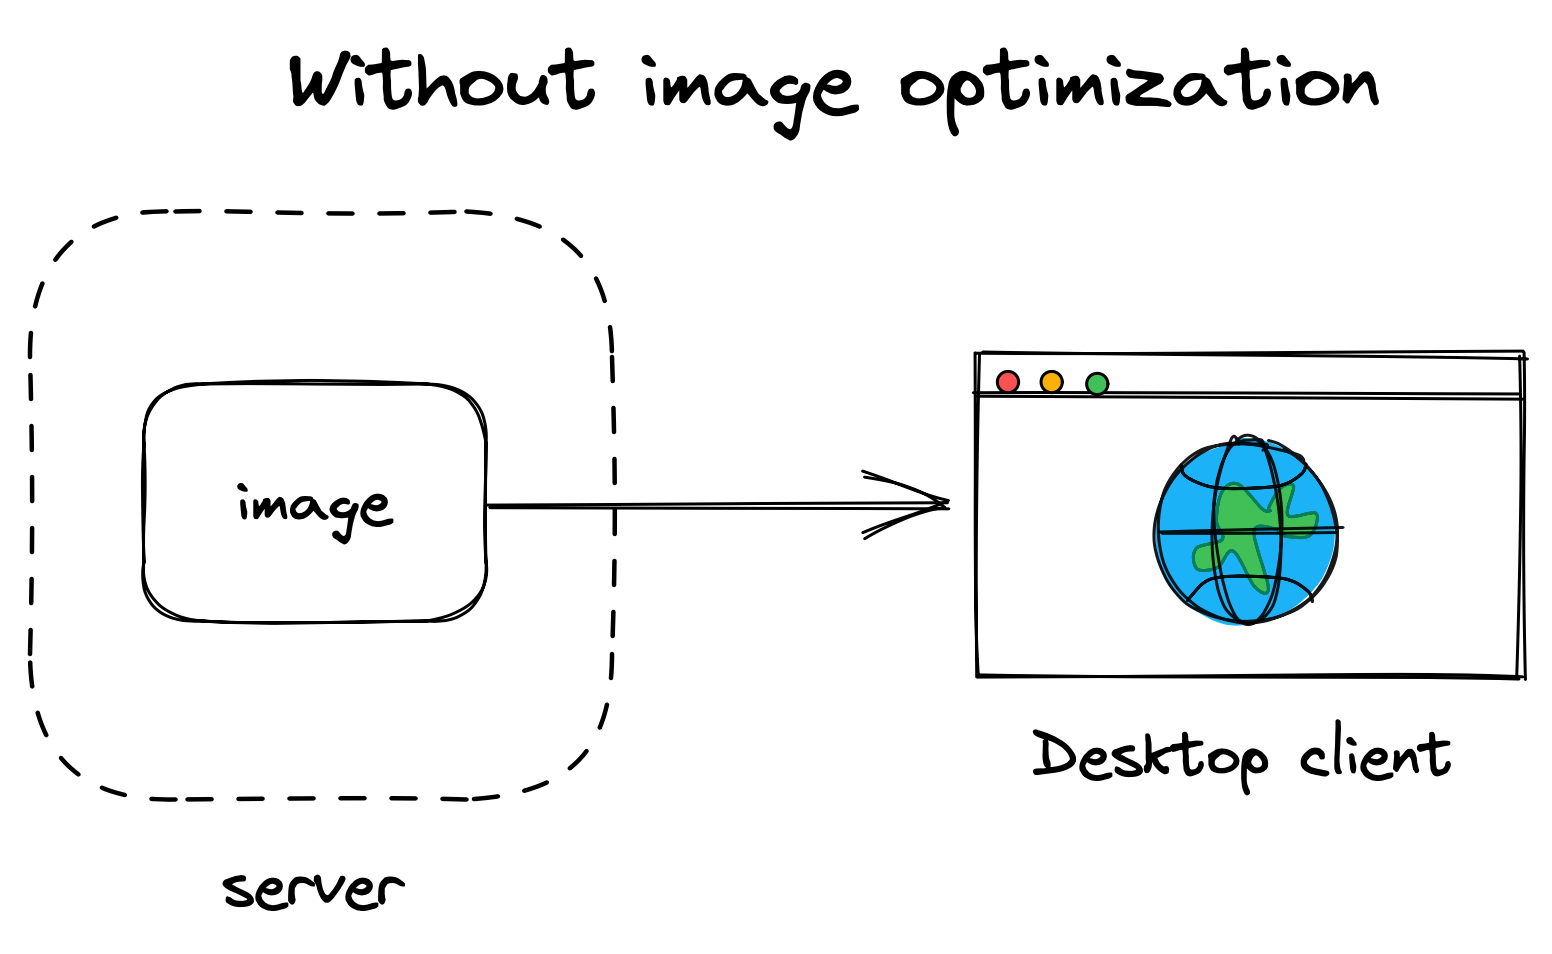 How images load without image optimization